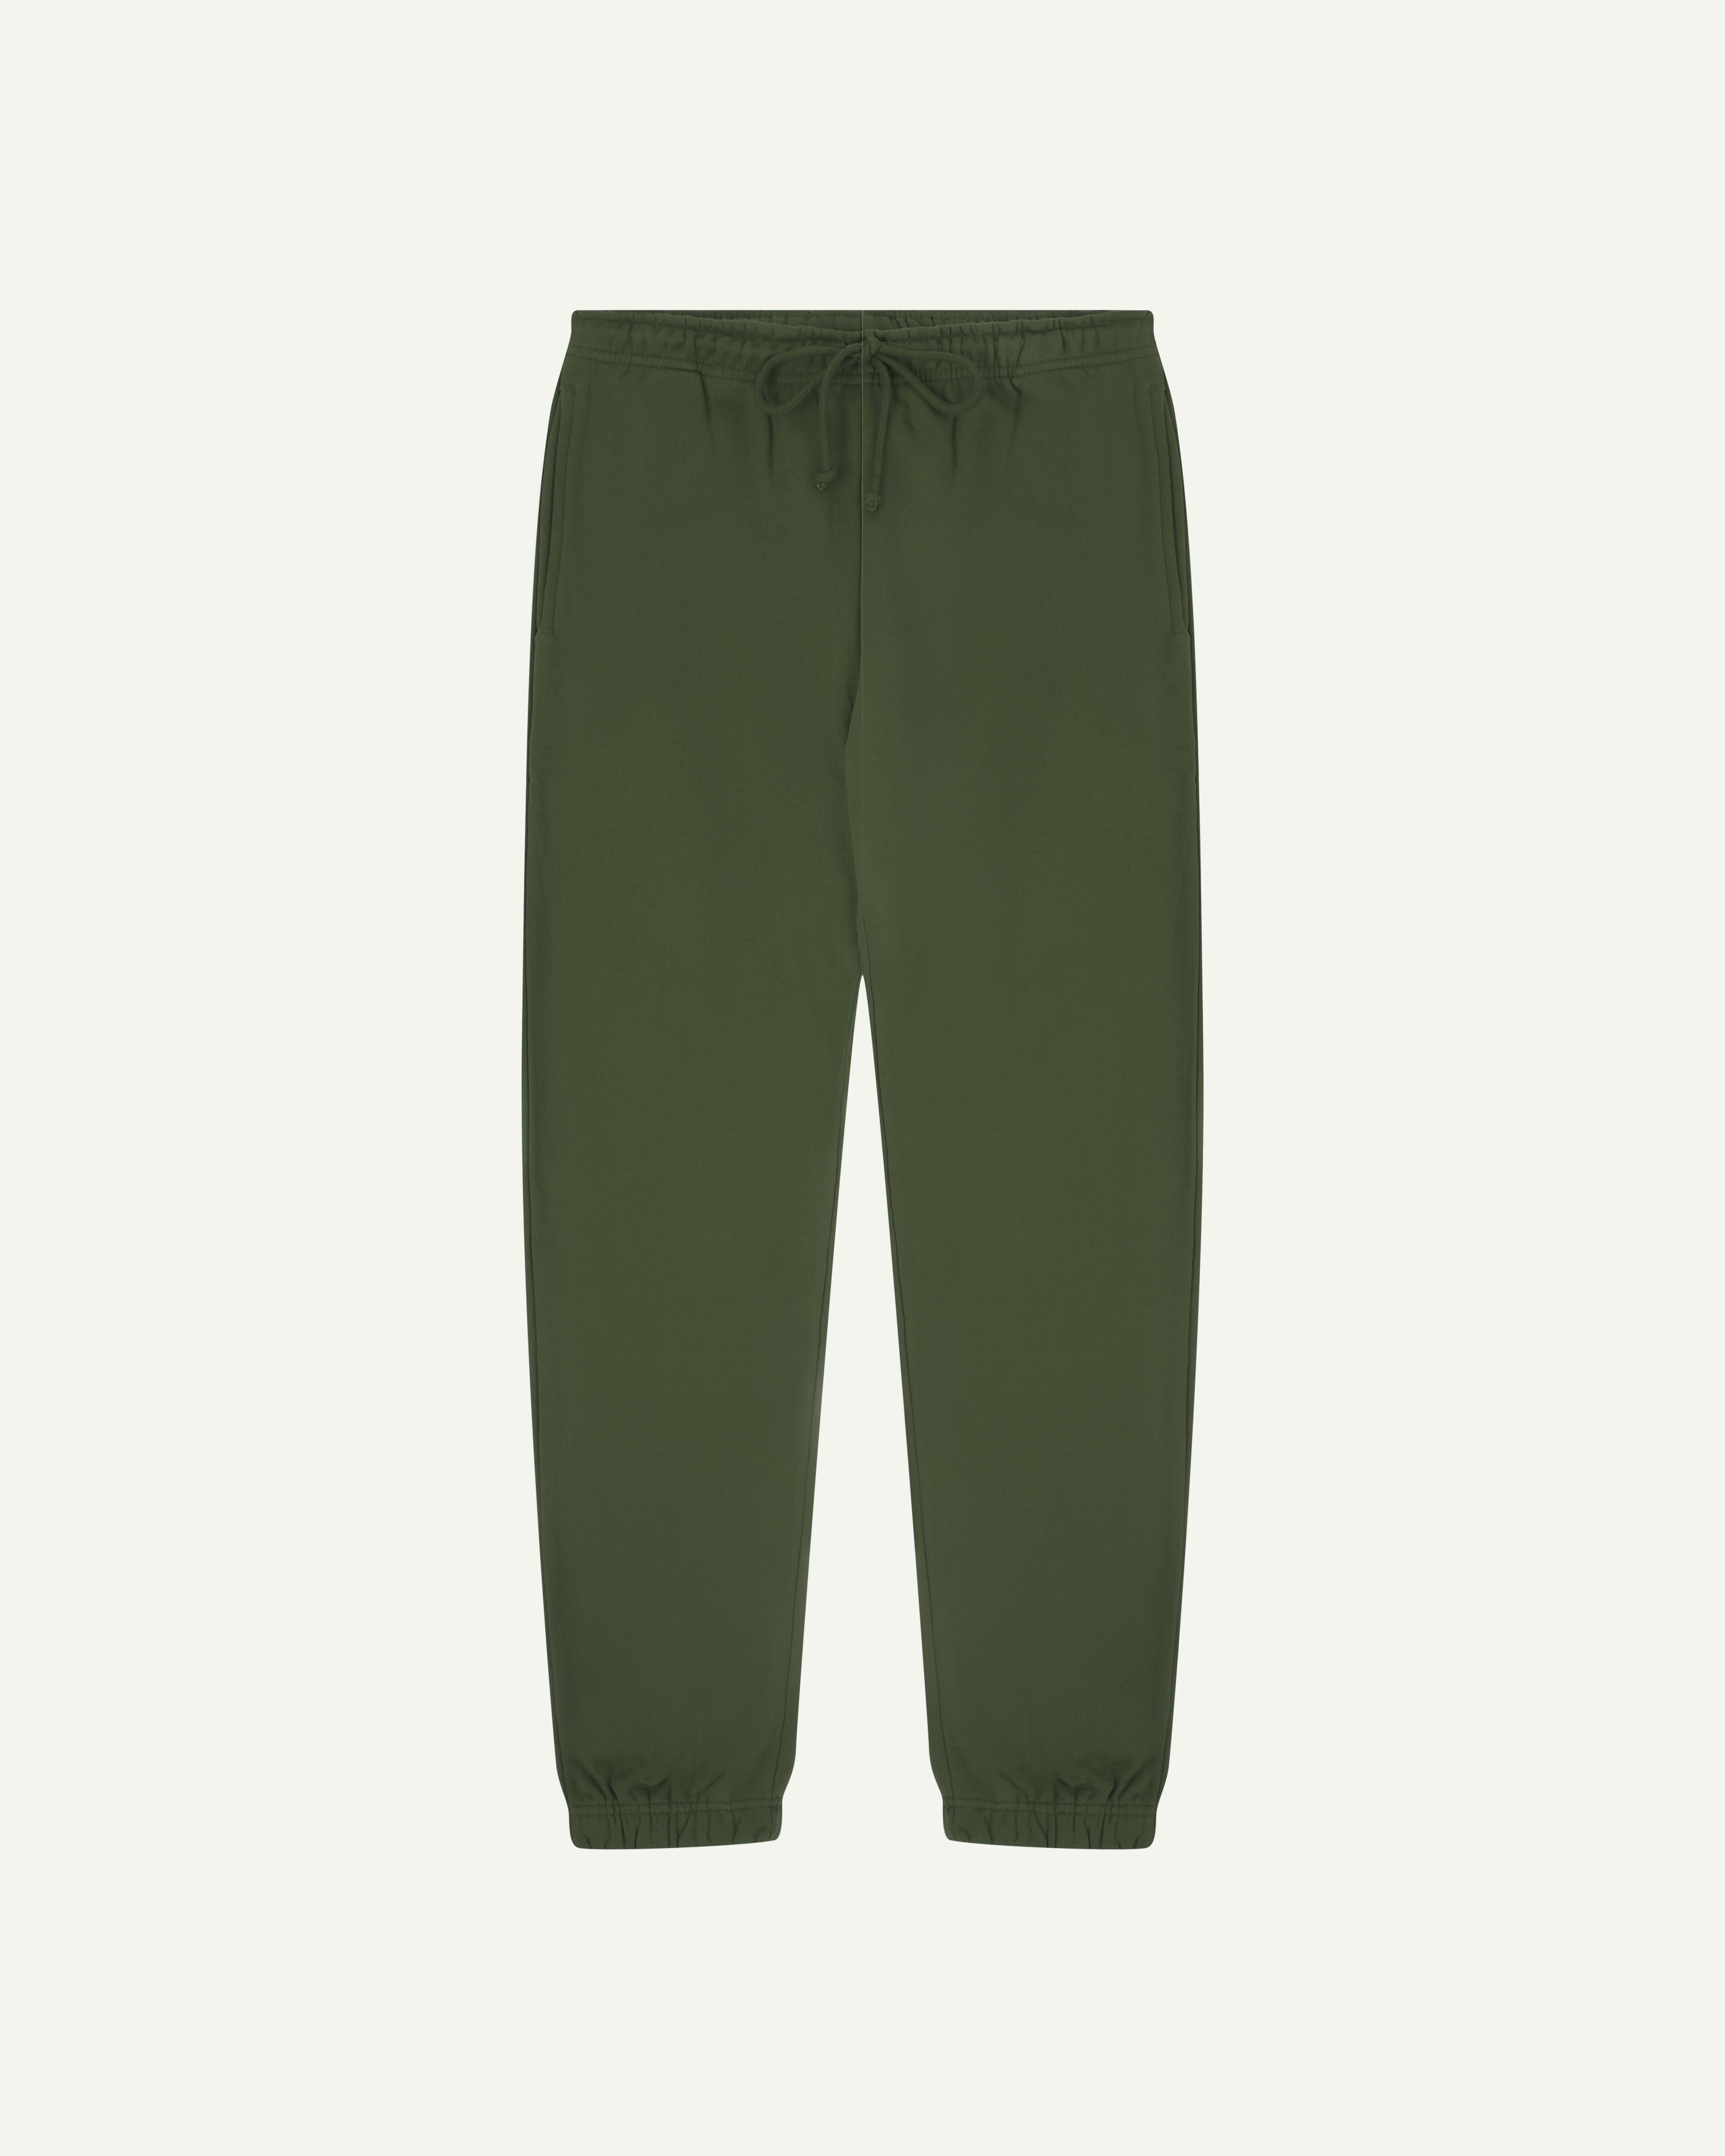 Front view of uskees men's jogging pants in mid-green organic cotton.